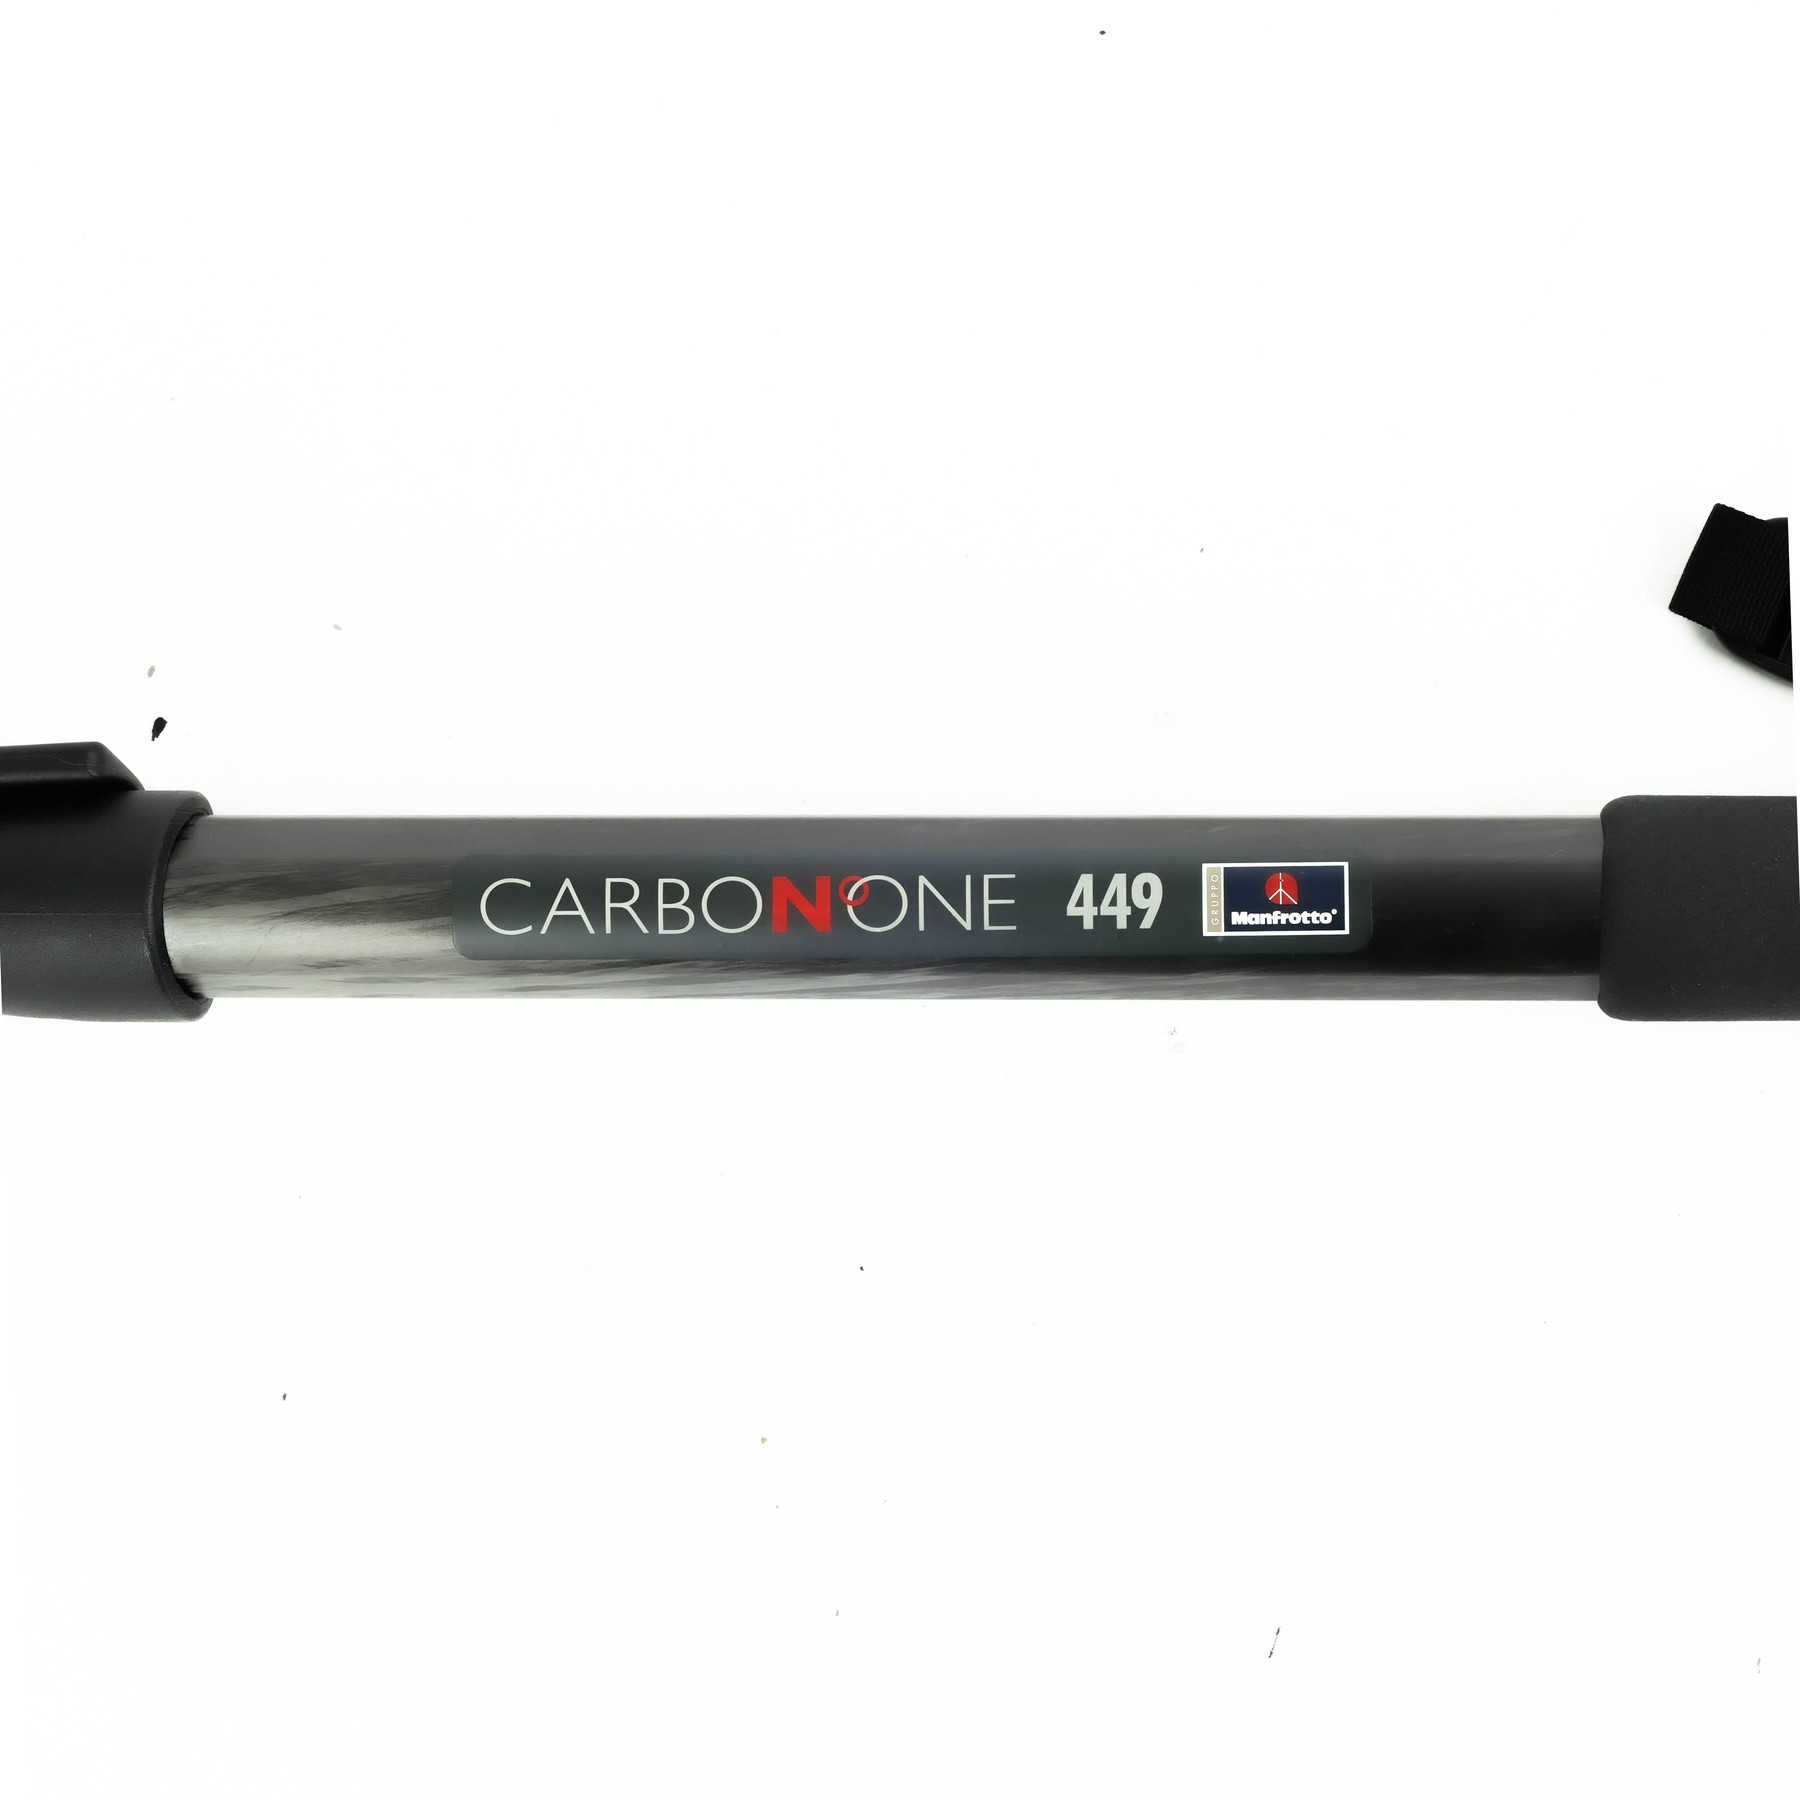 Manfrotto монопод 449 carbon